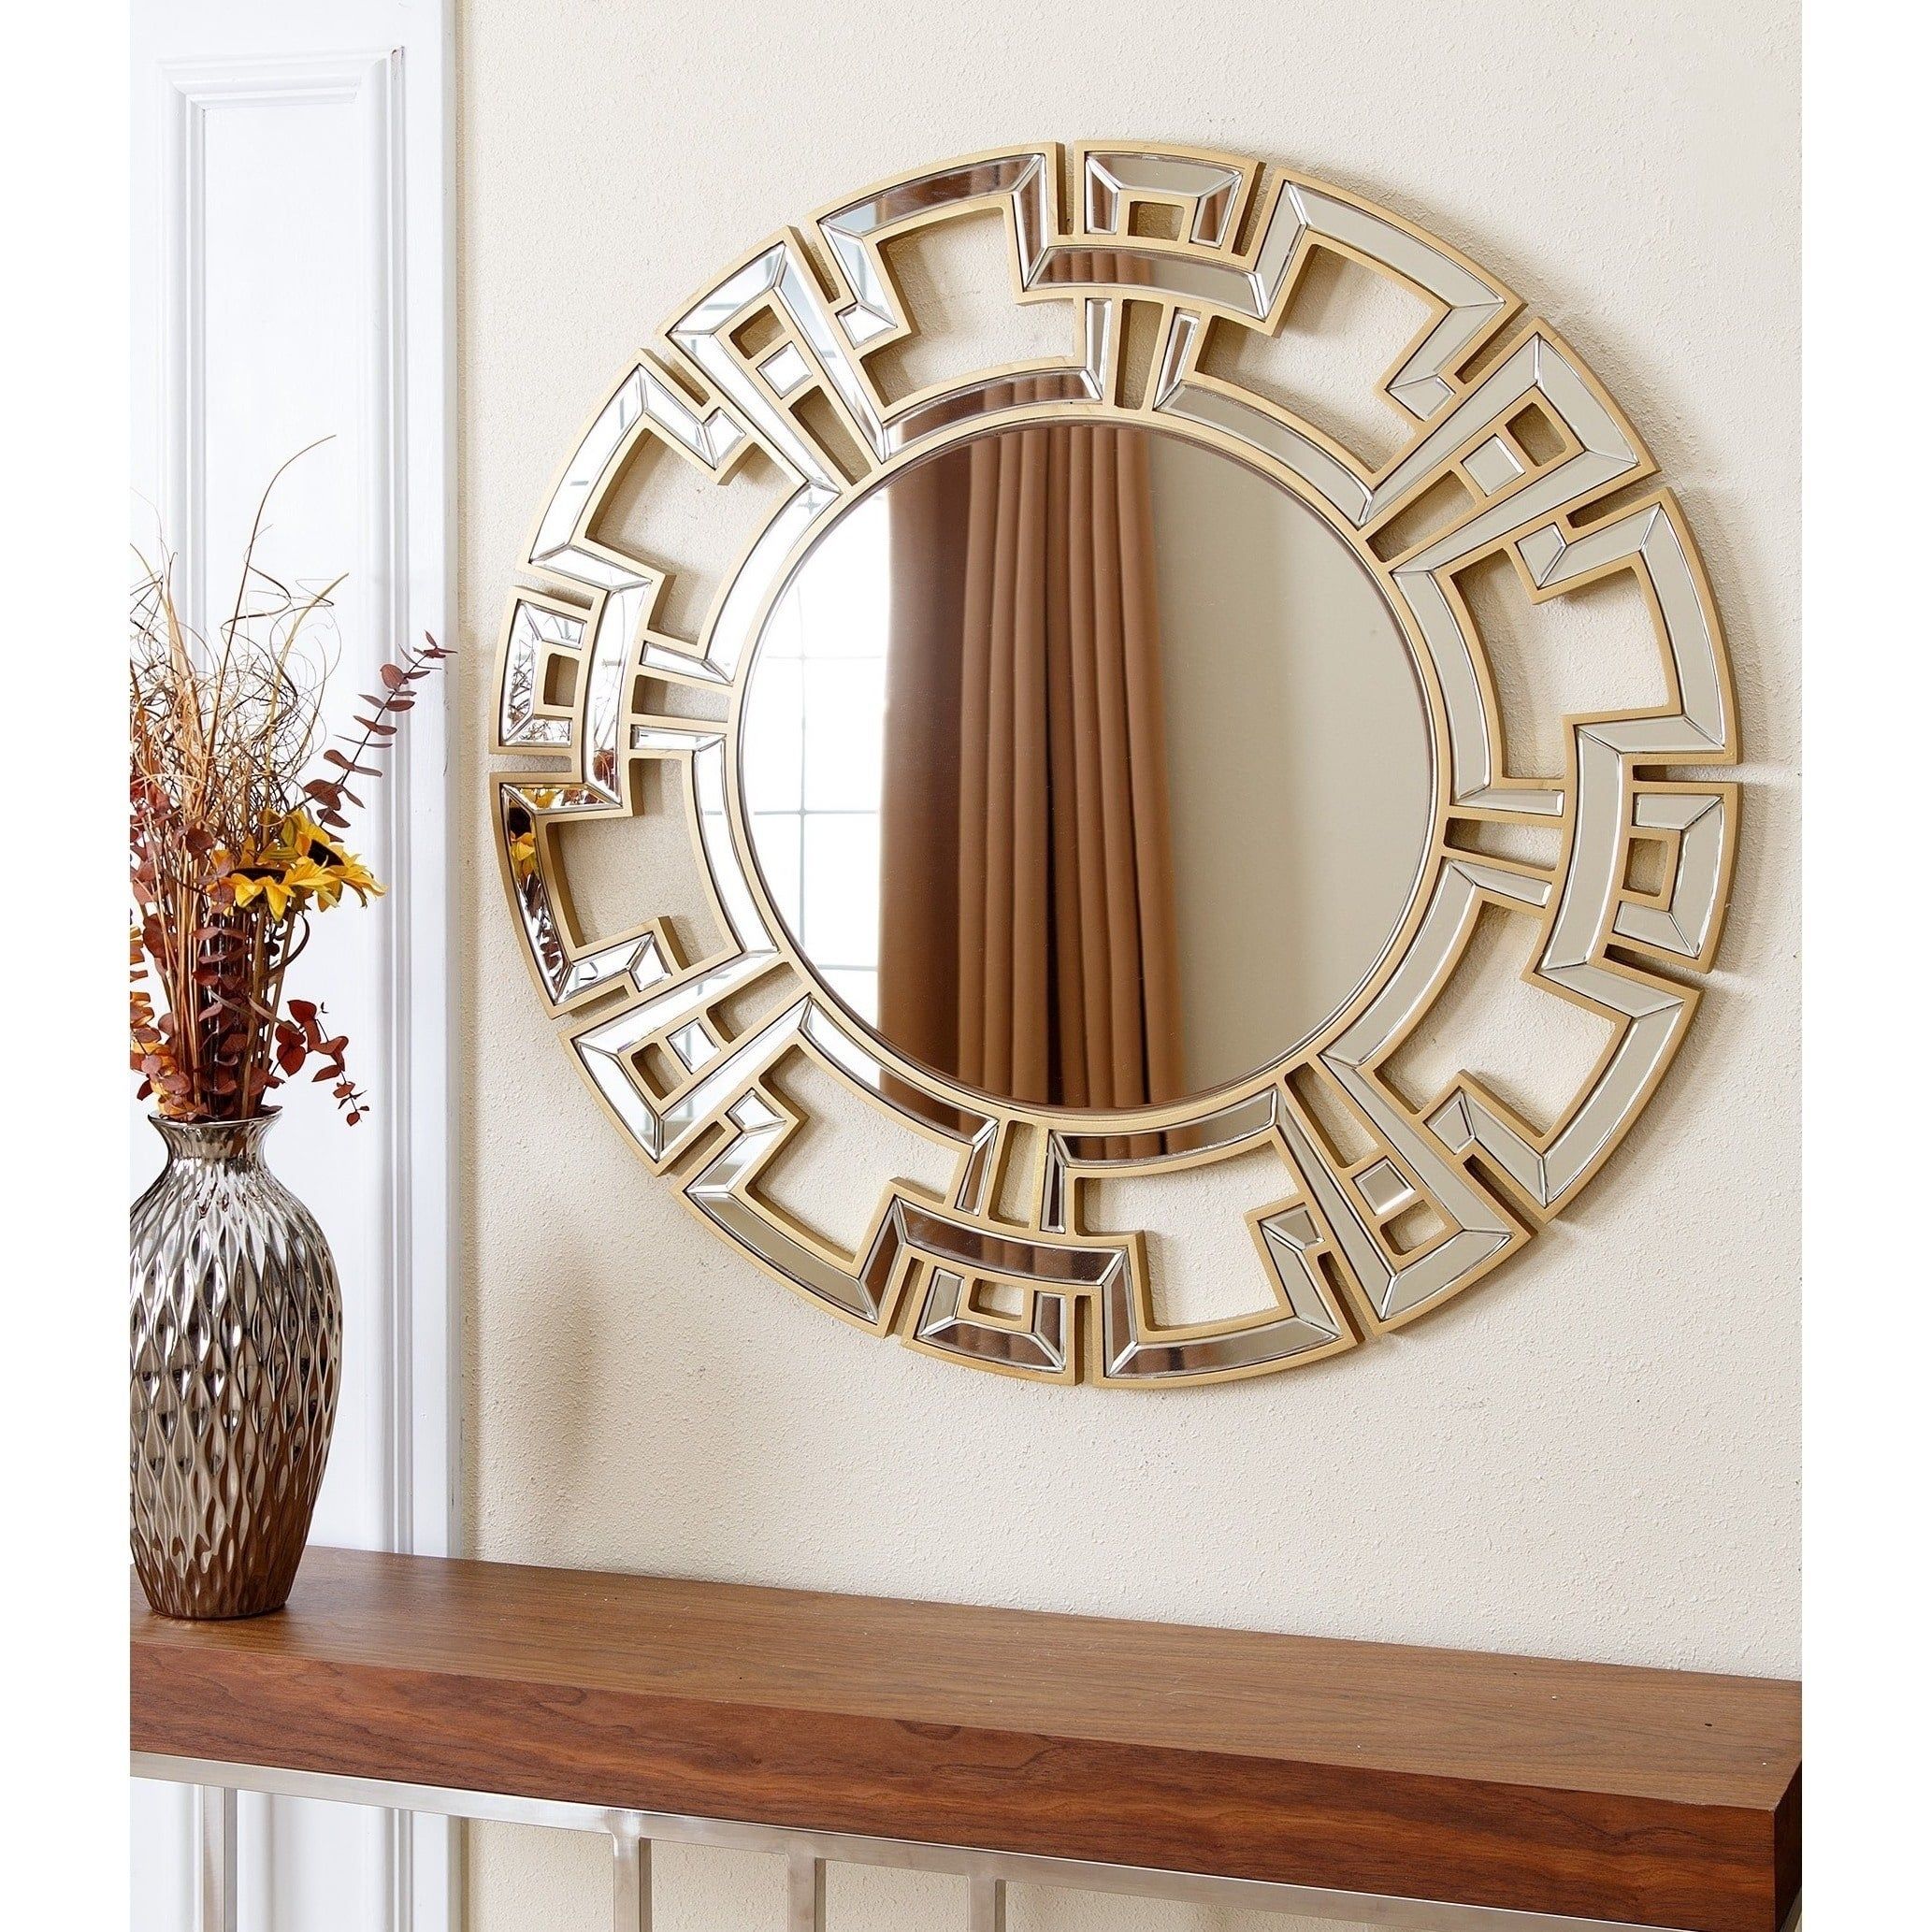 Abbyson Wall Mirror Accent Gold Wood Round Crafted Entryway Mounted Inside Organic Natural Wood Round Wall Mirrors (View 15 of 15)